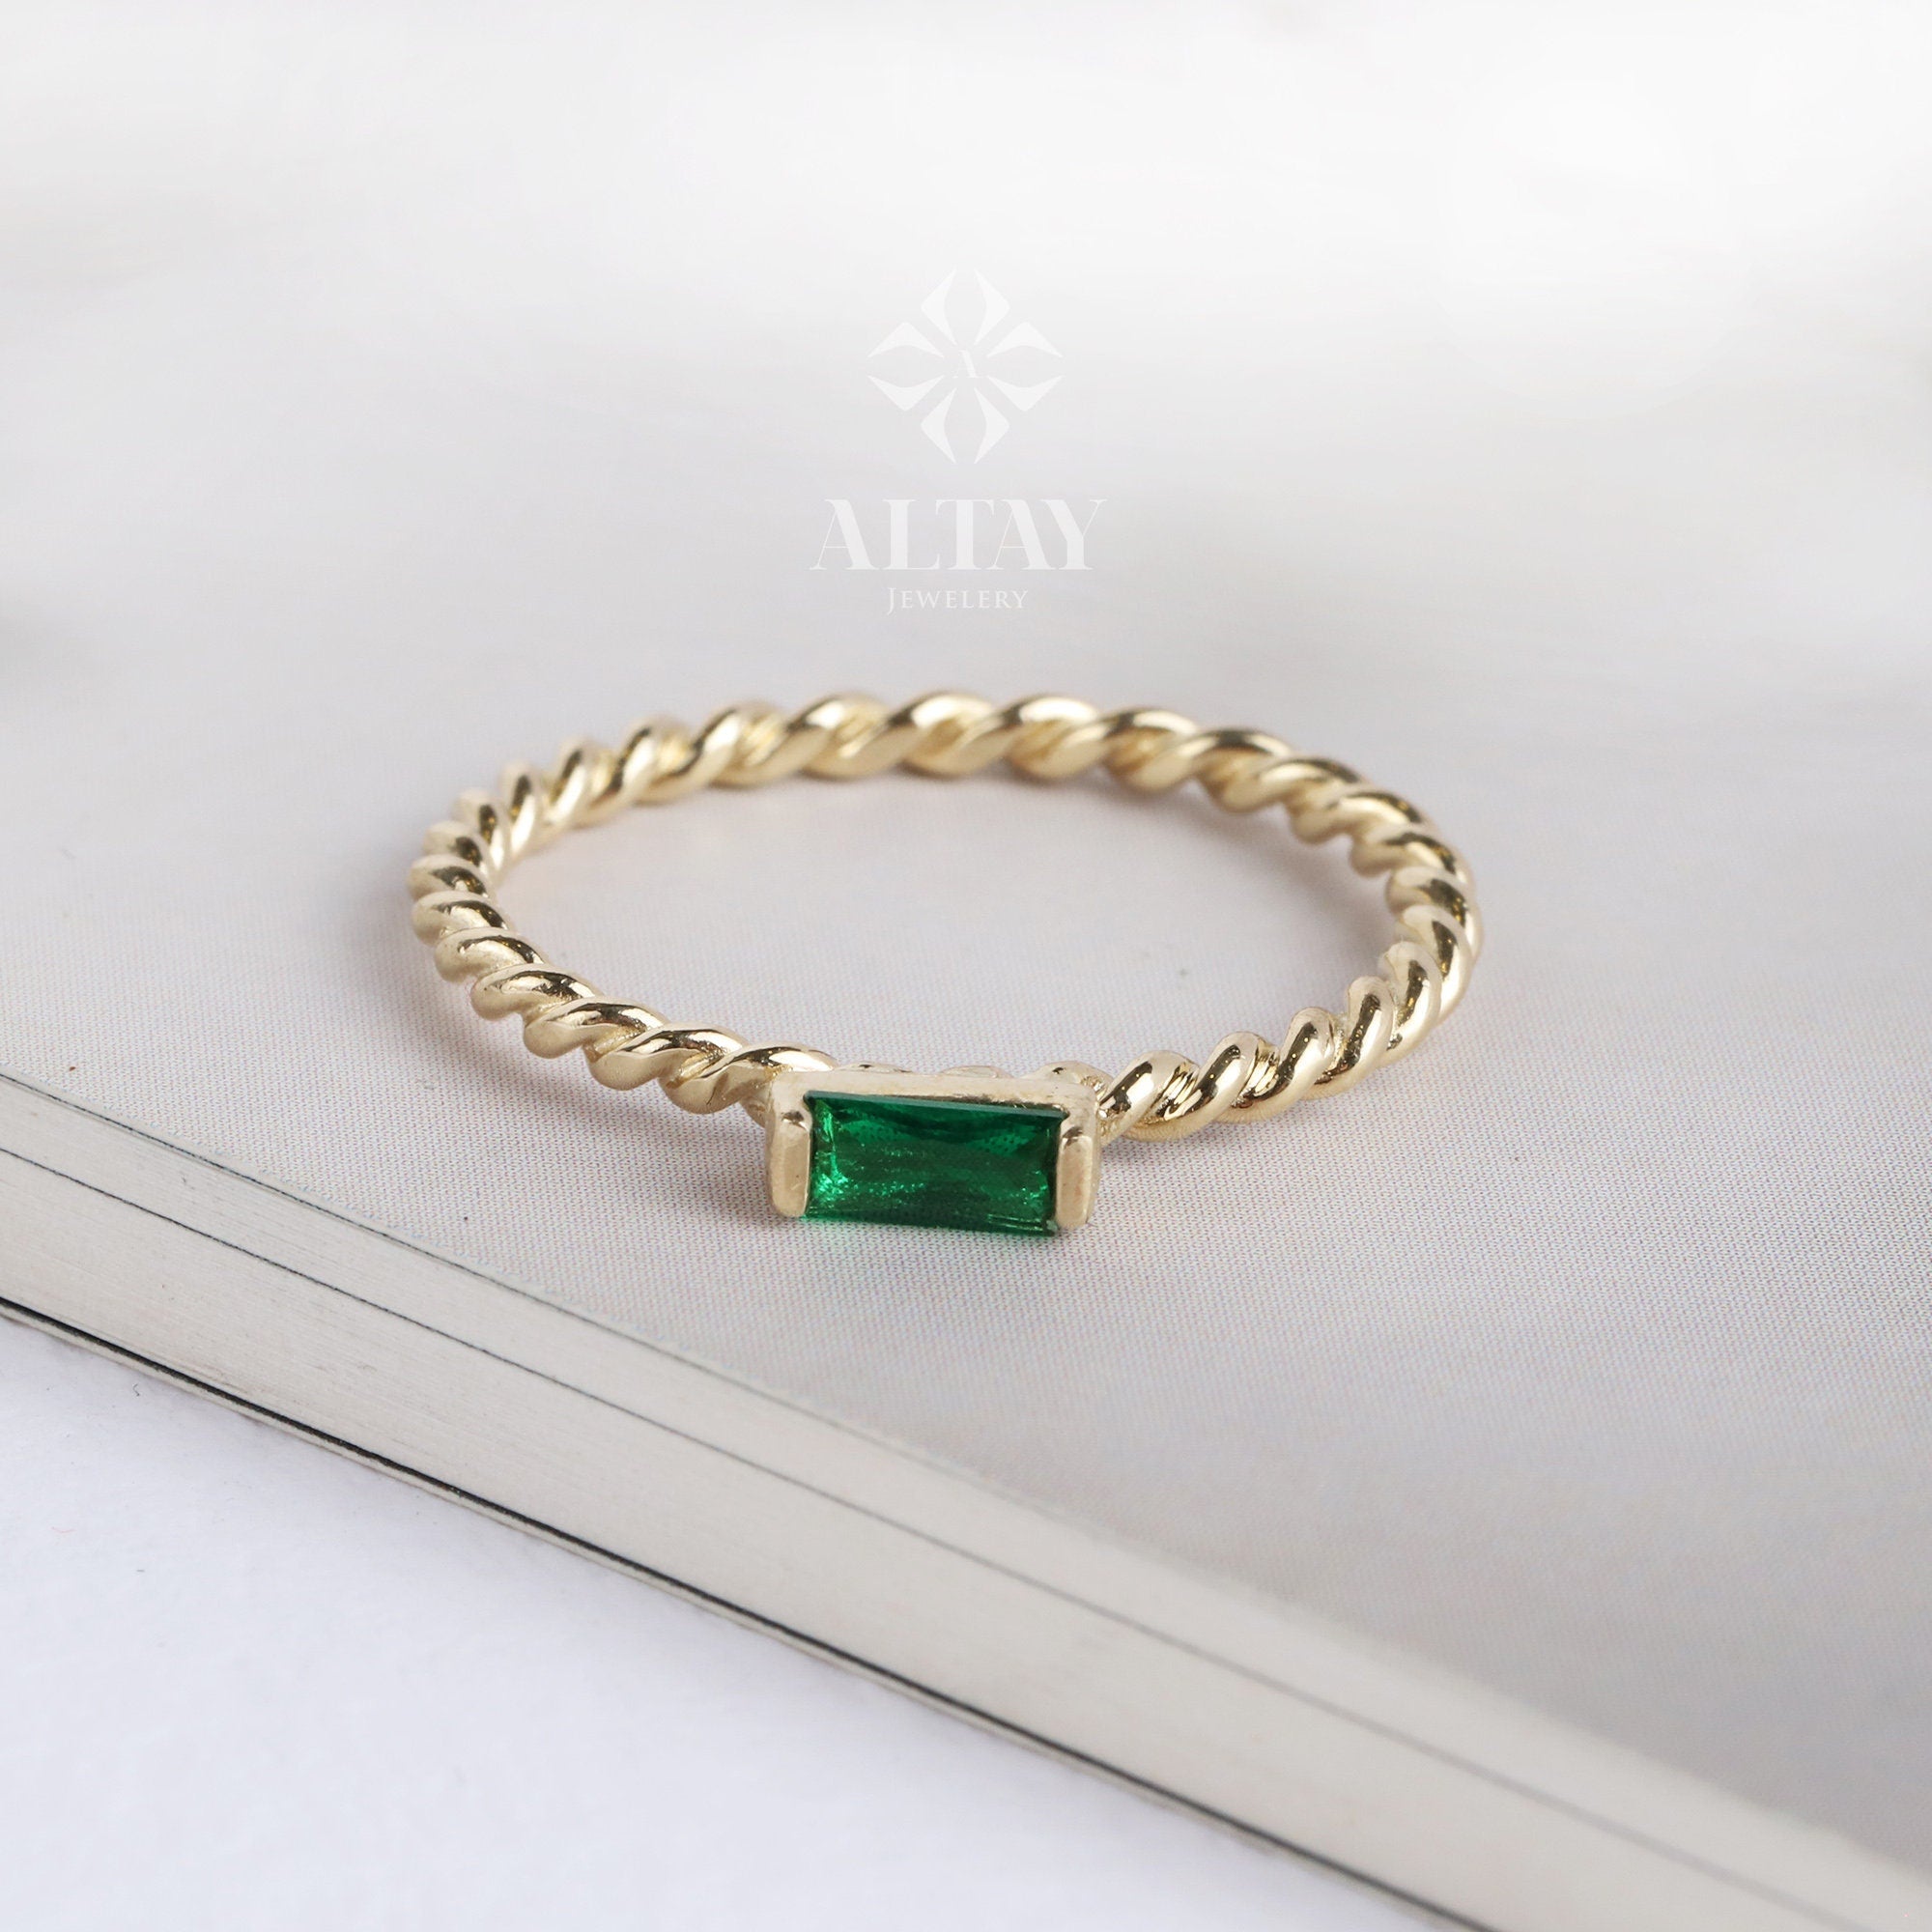 14K Gold Baguette Birthstone Ring, Custom Stackable Gemstone Ring, Braided Twist Rope Band Ring, Family Birthstone Ring, Personalized Gift